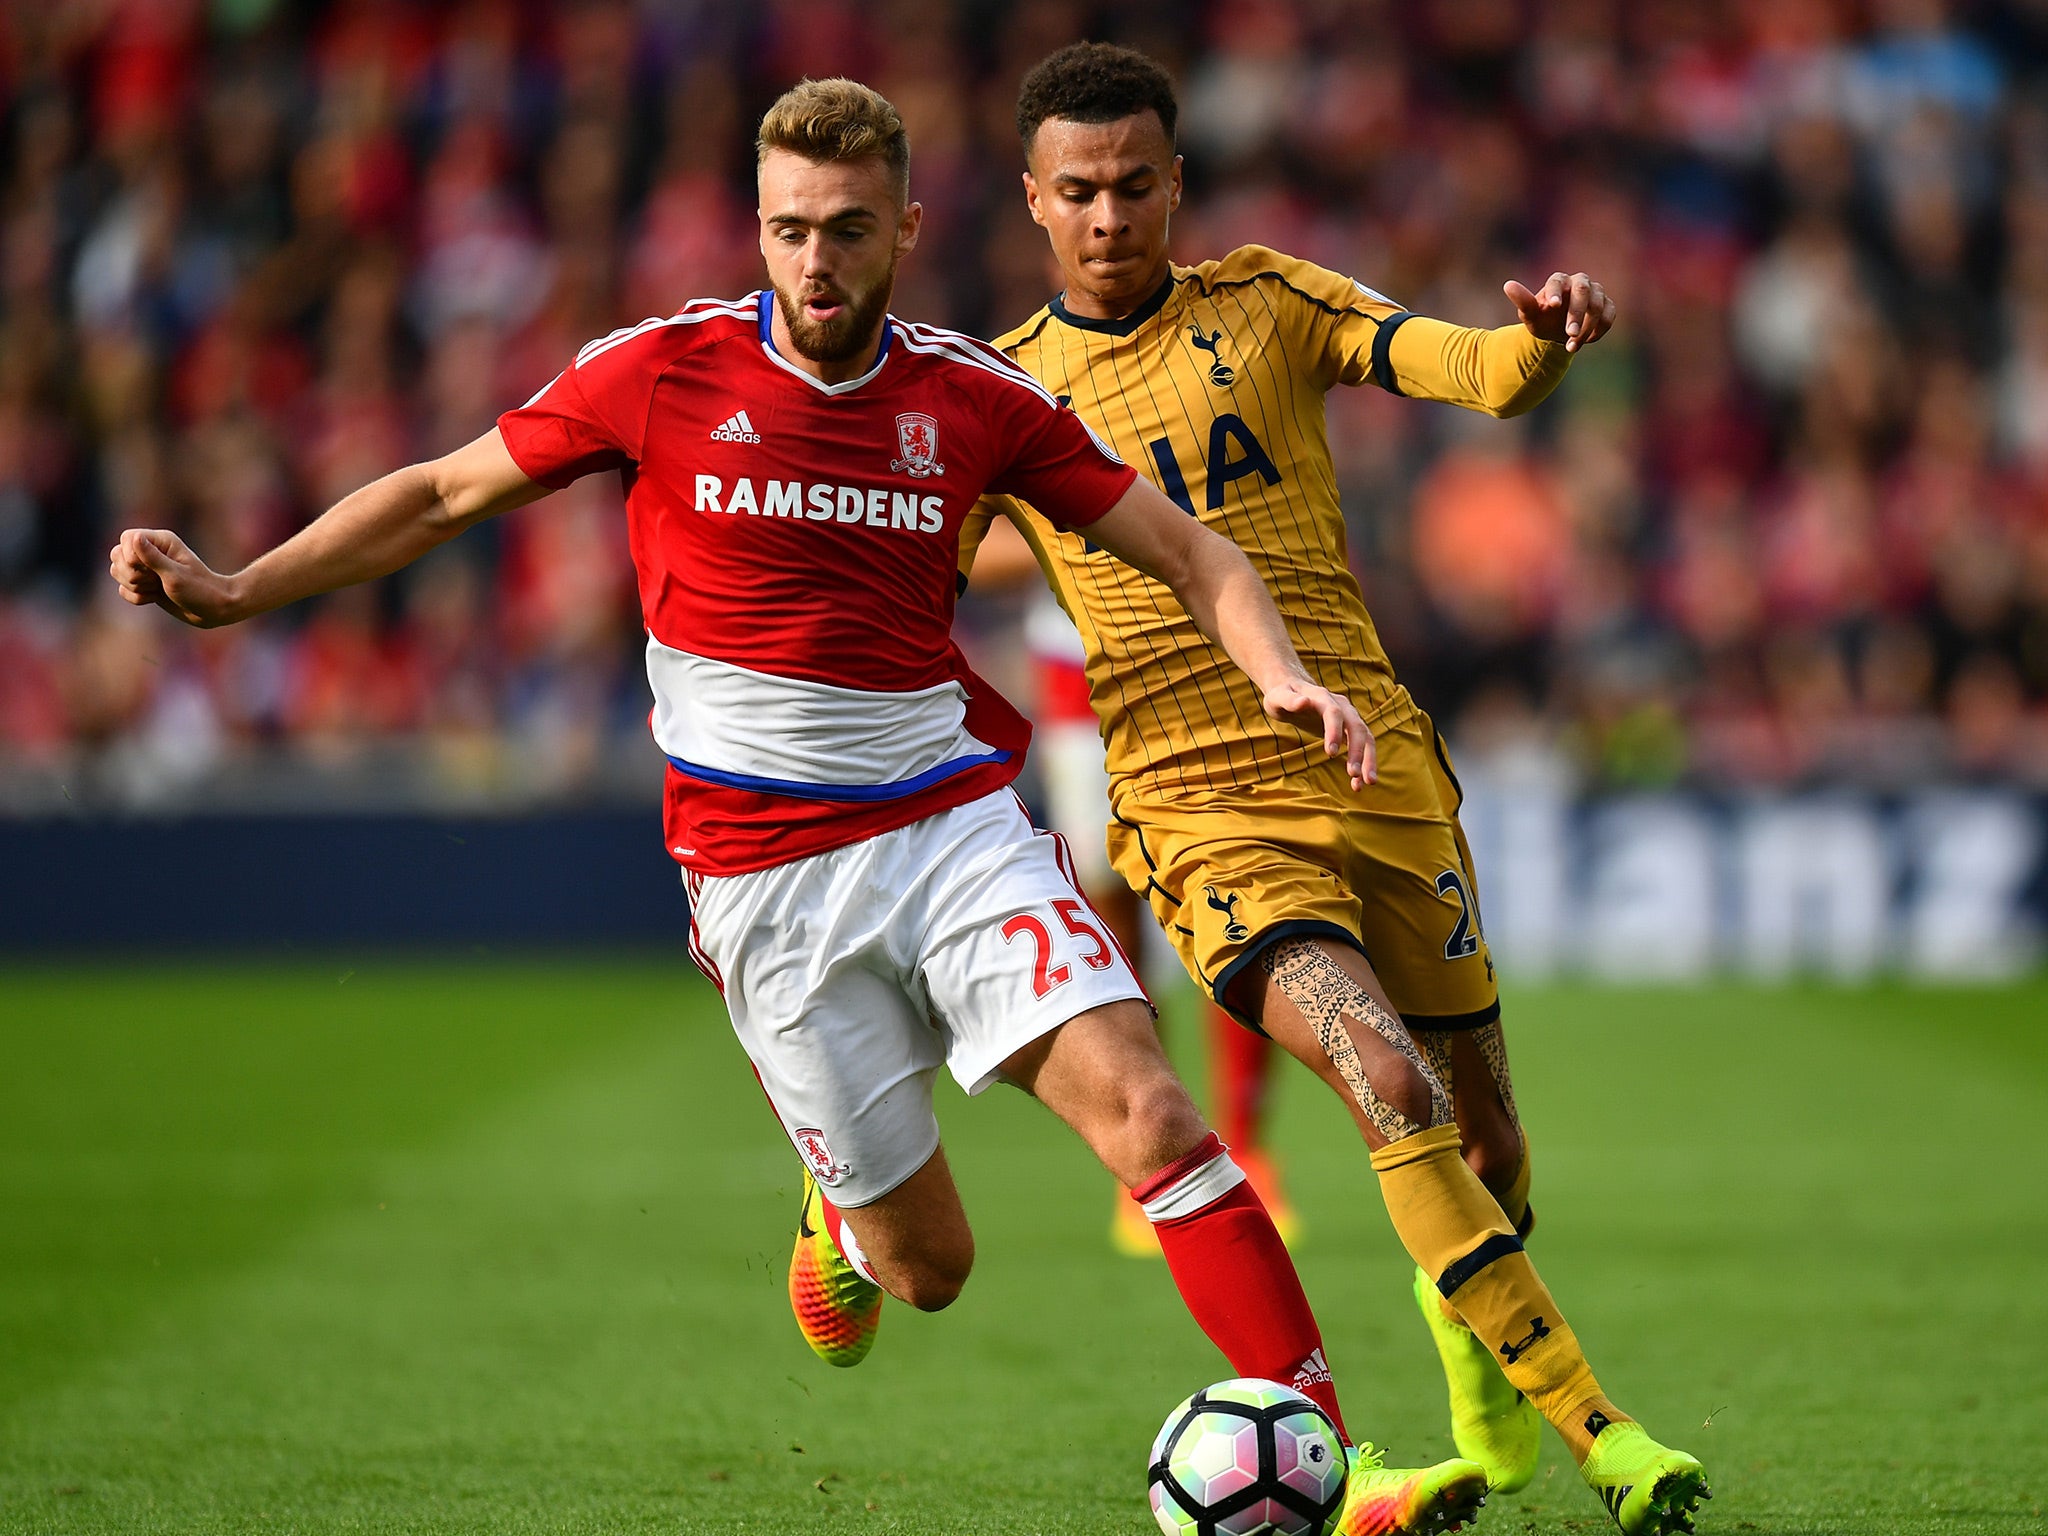 Calum Chambers and Dele Alli challenge for the ball in this season's earlier fixture